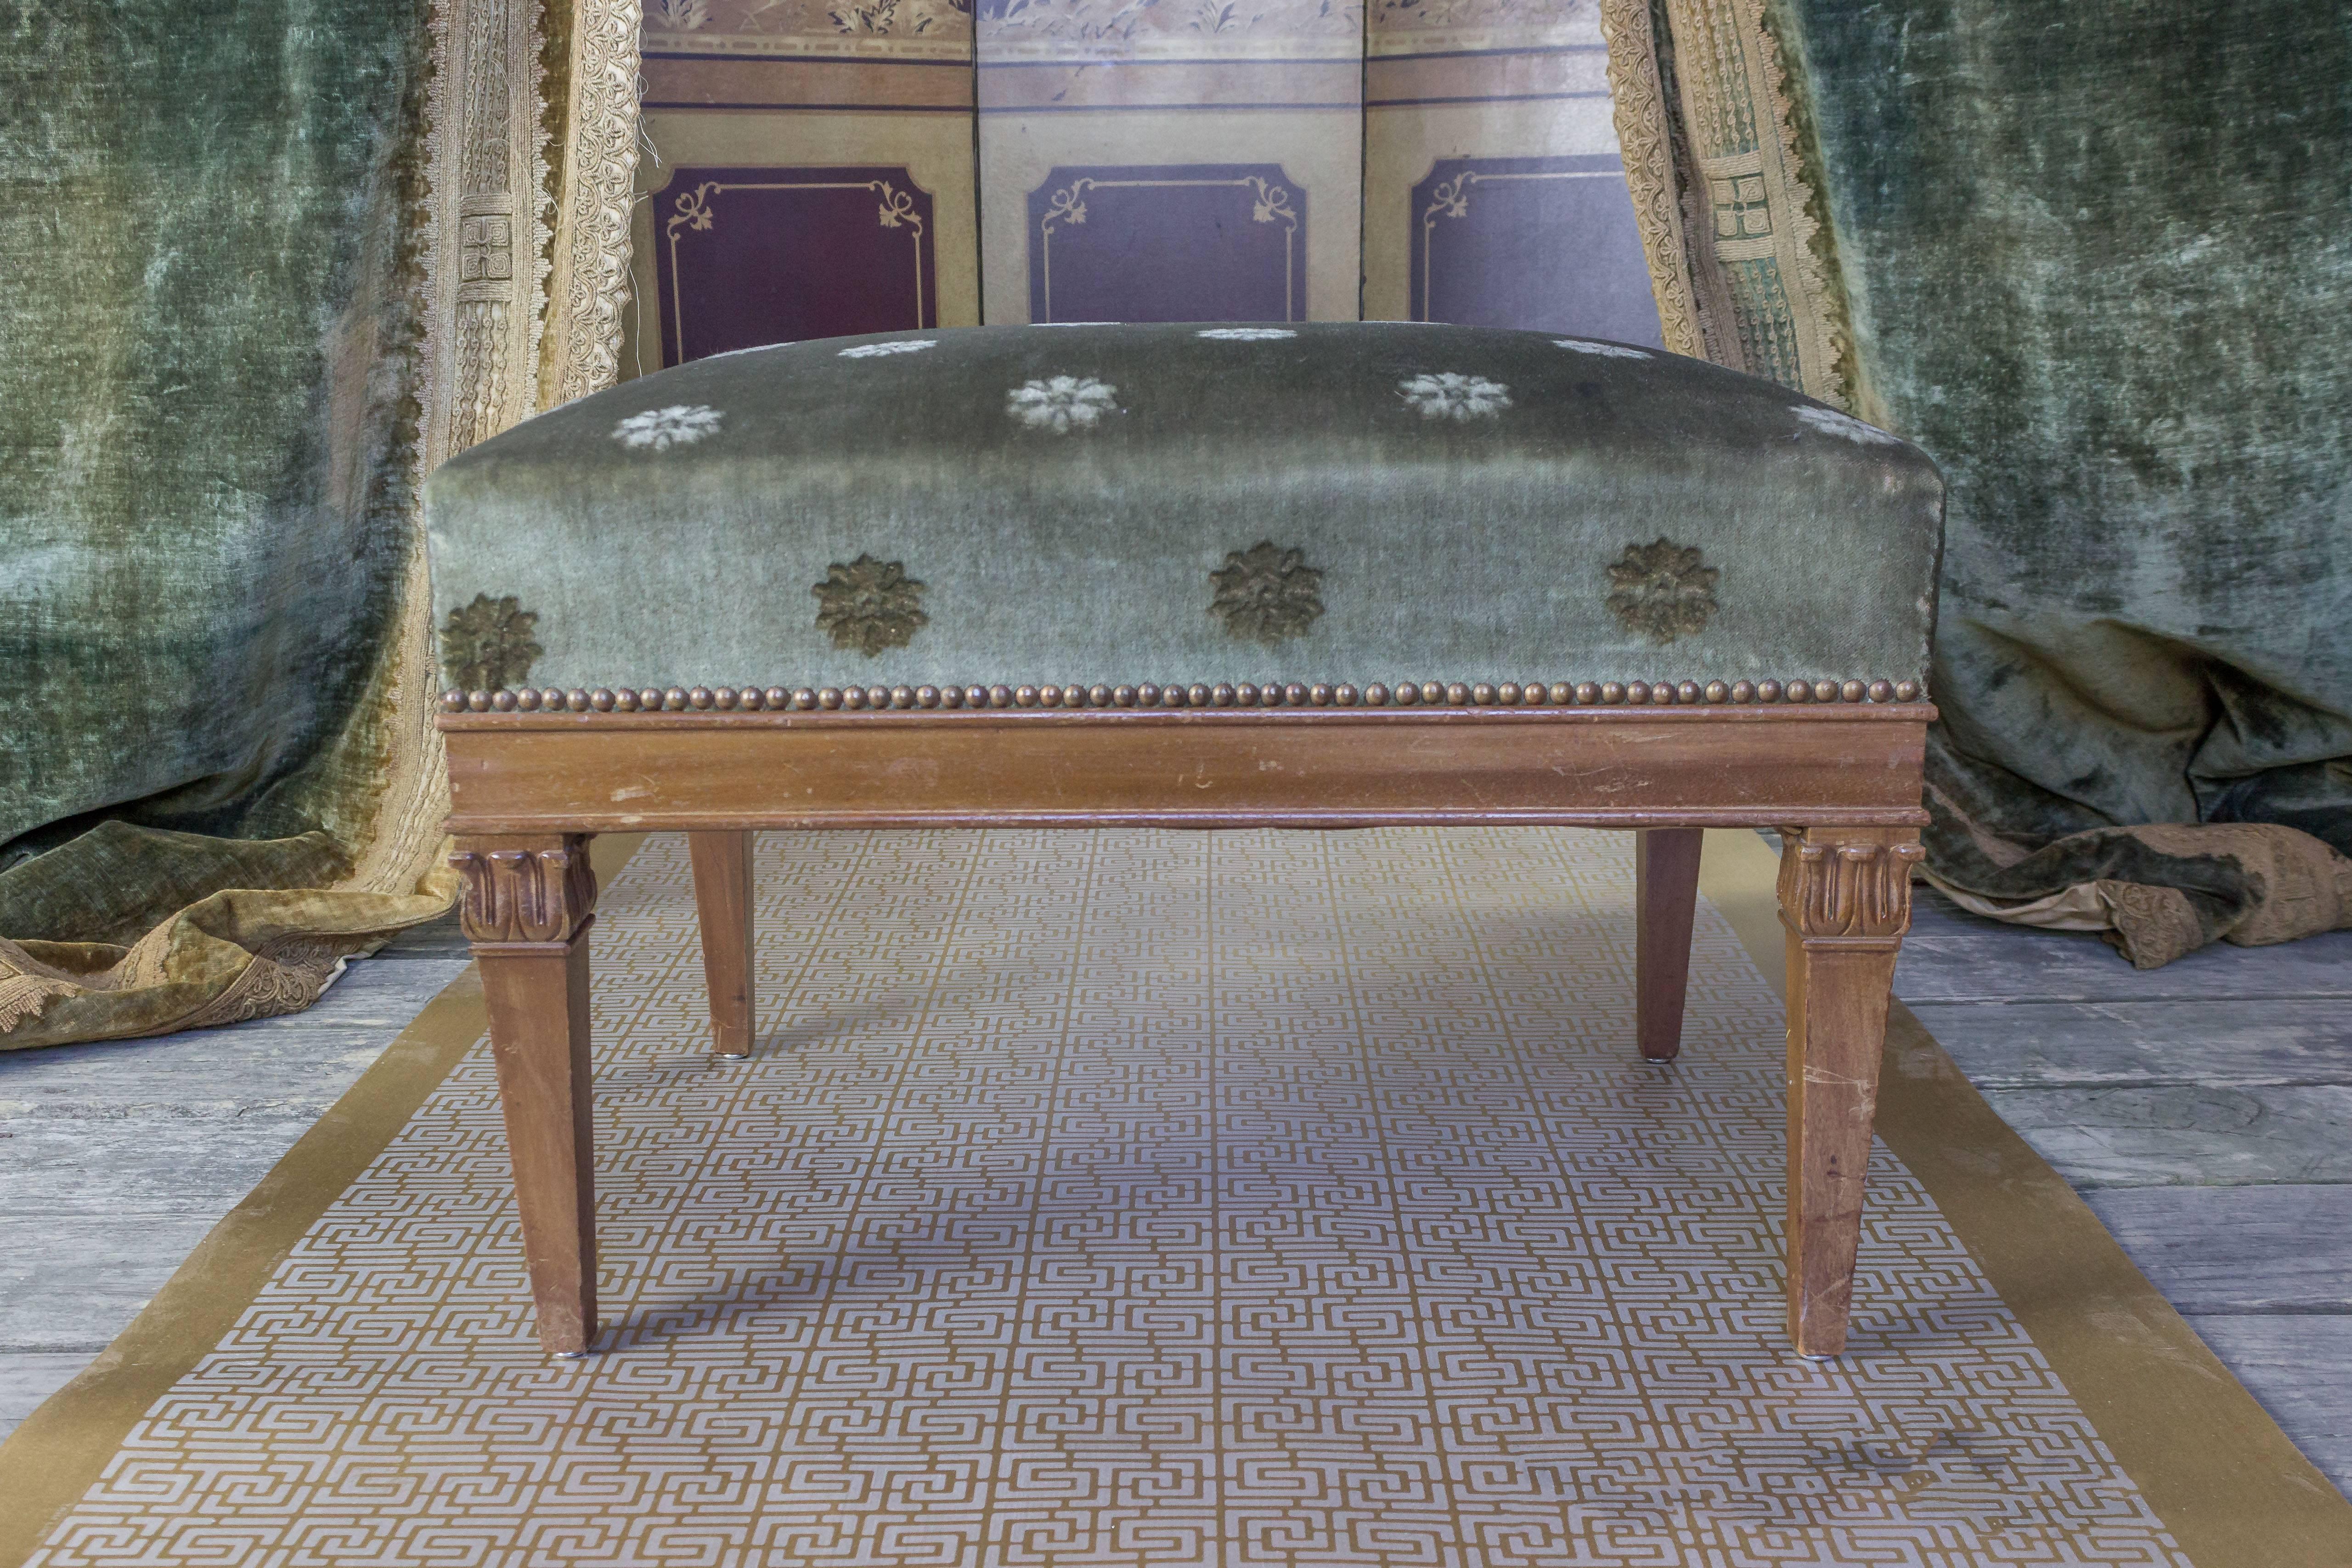 A French neoclassical-style bench with upholstered seat and nailhead detailing. Make any room grand with this exquisite neoclassical-style bench from France. The frame needs polishing, but the upholstered seat with the nailhead detailing gives it a